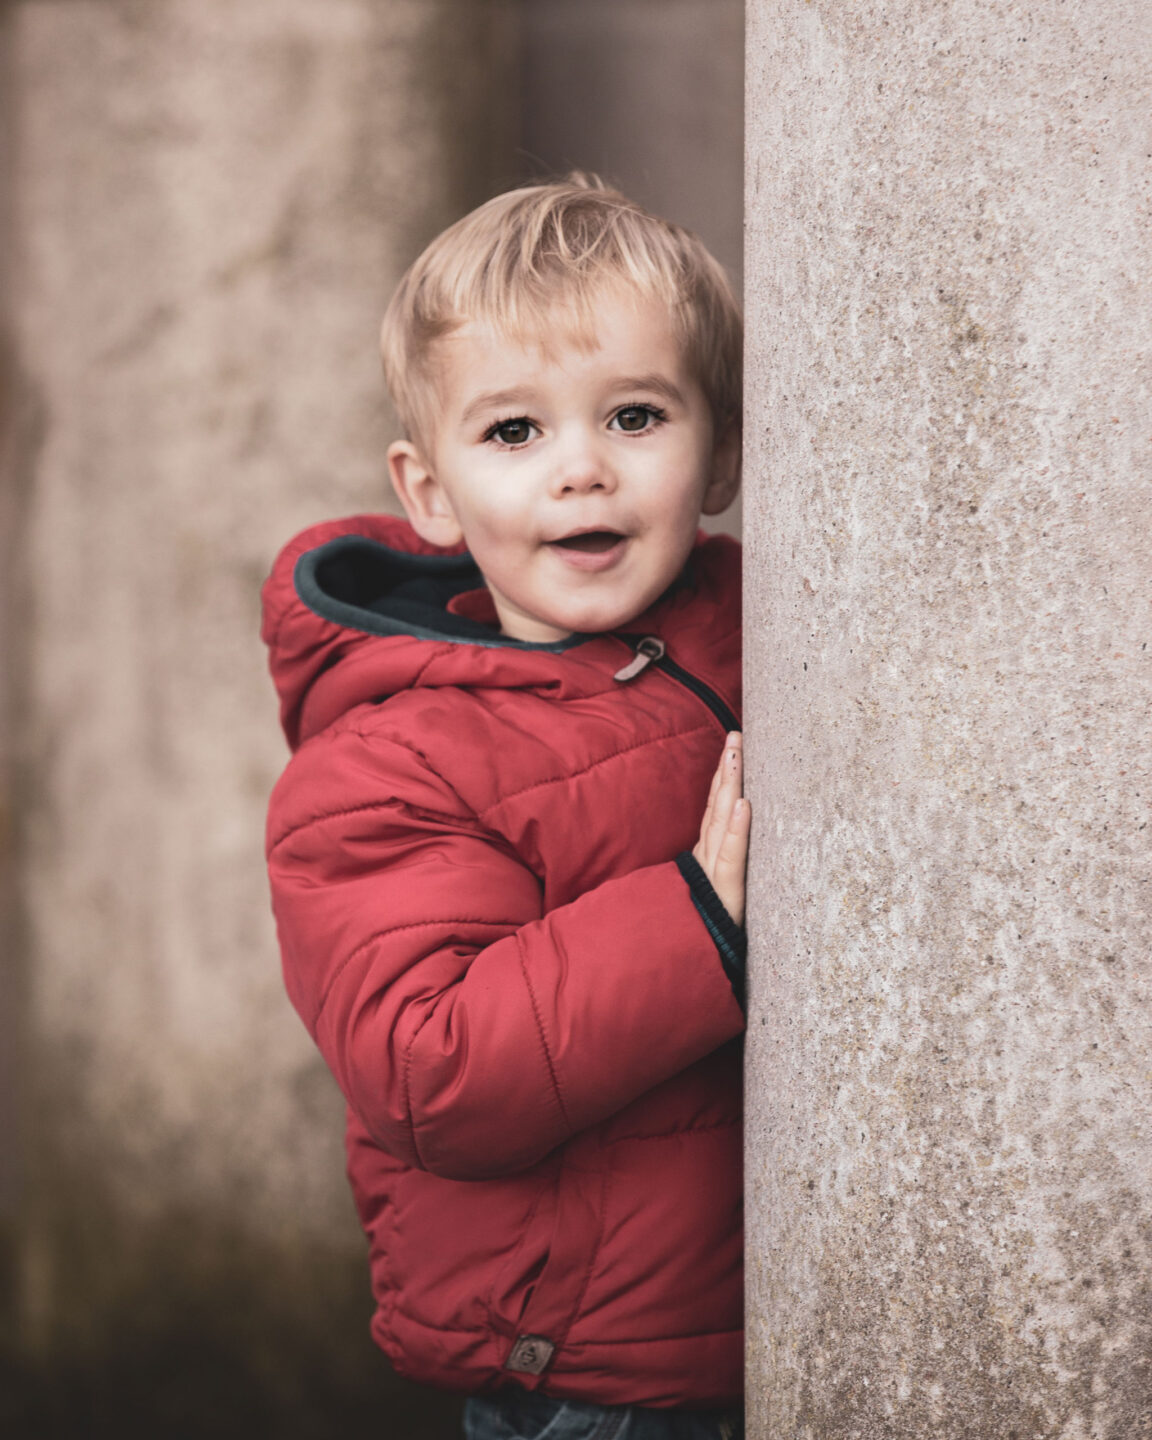 Cute blonde child peeking out from a pillar outdoors wearing a red coat